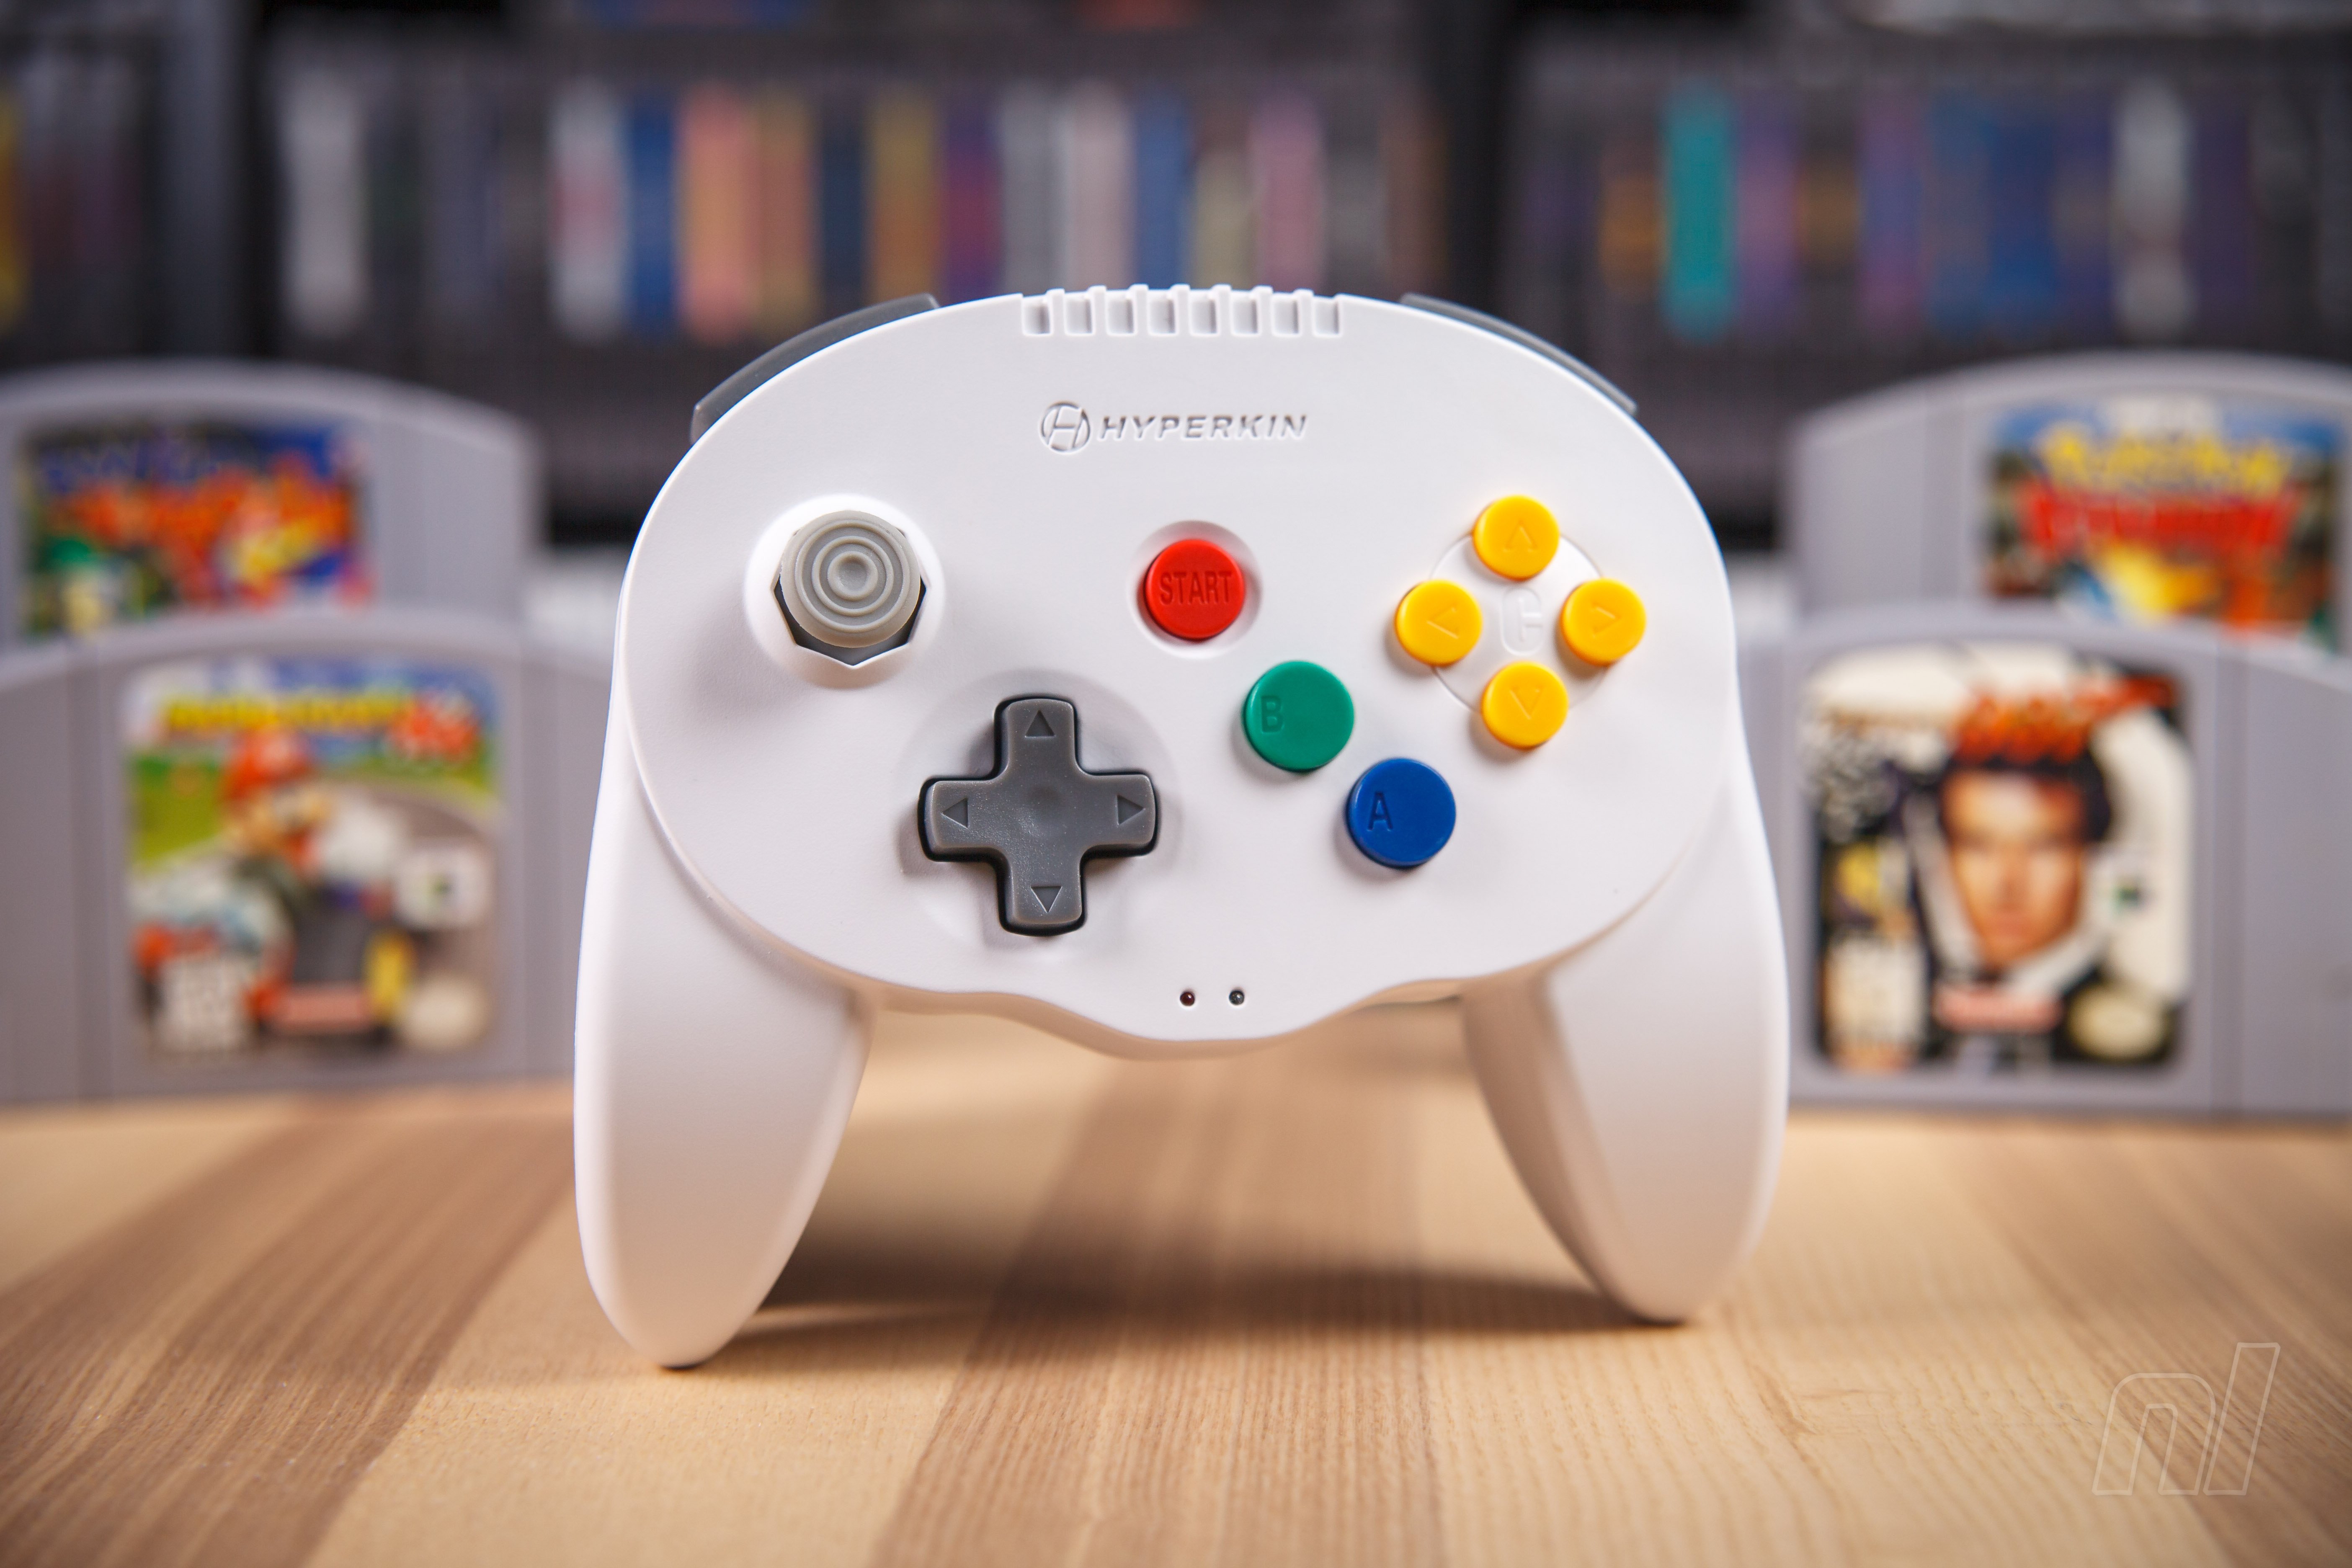 n64 controller for wii